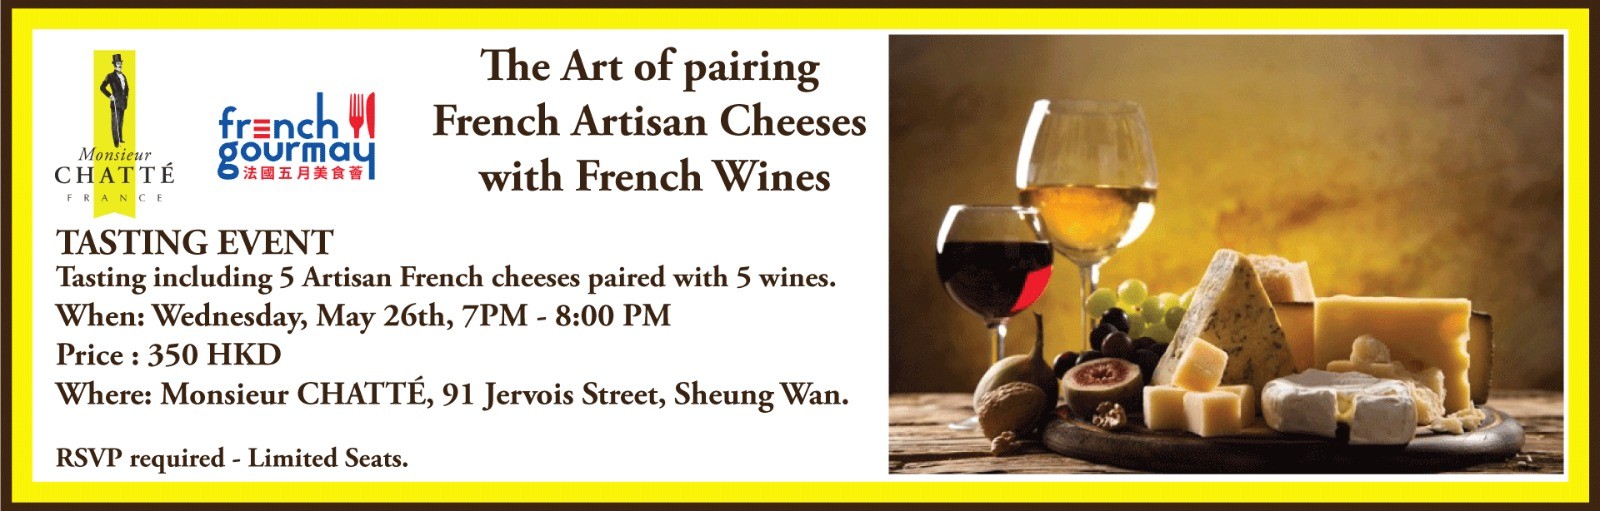 The art of French Artisan Cheeses pairing with French Wines